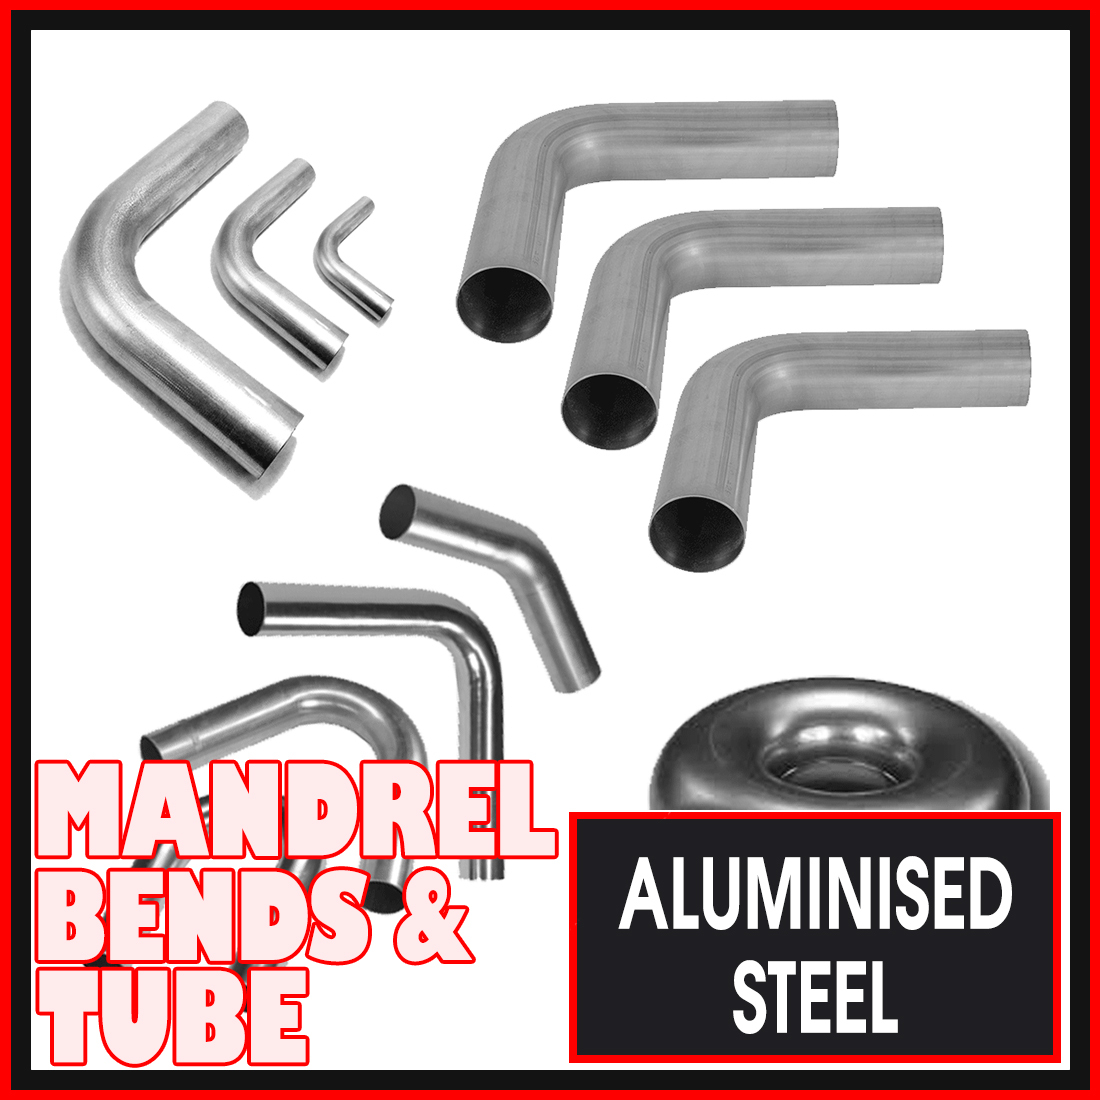 2 1/4" Aluminised Mild Steel Mandrel Bends and Exhaust Pipe image